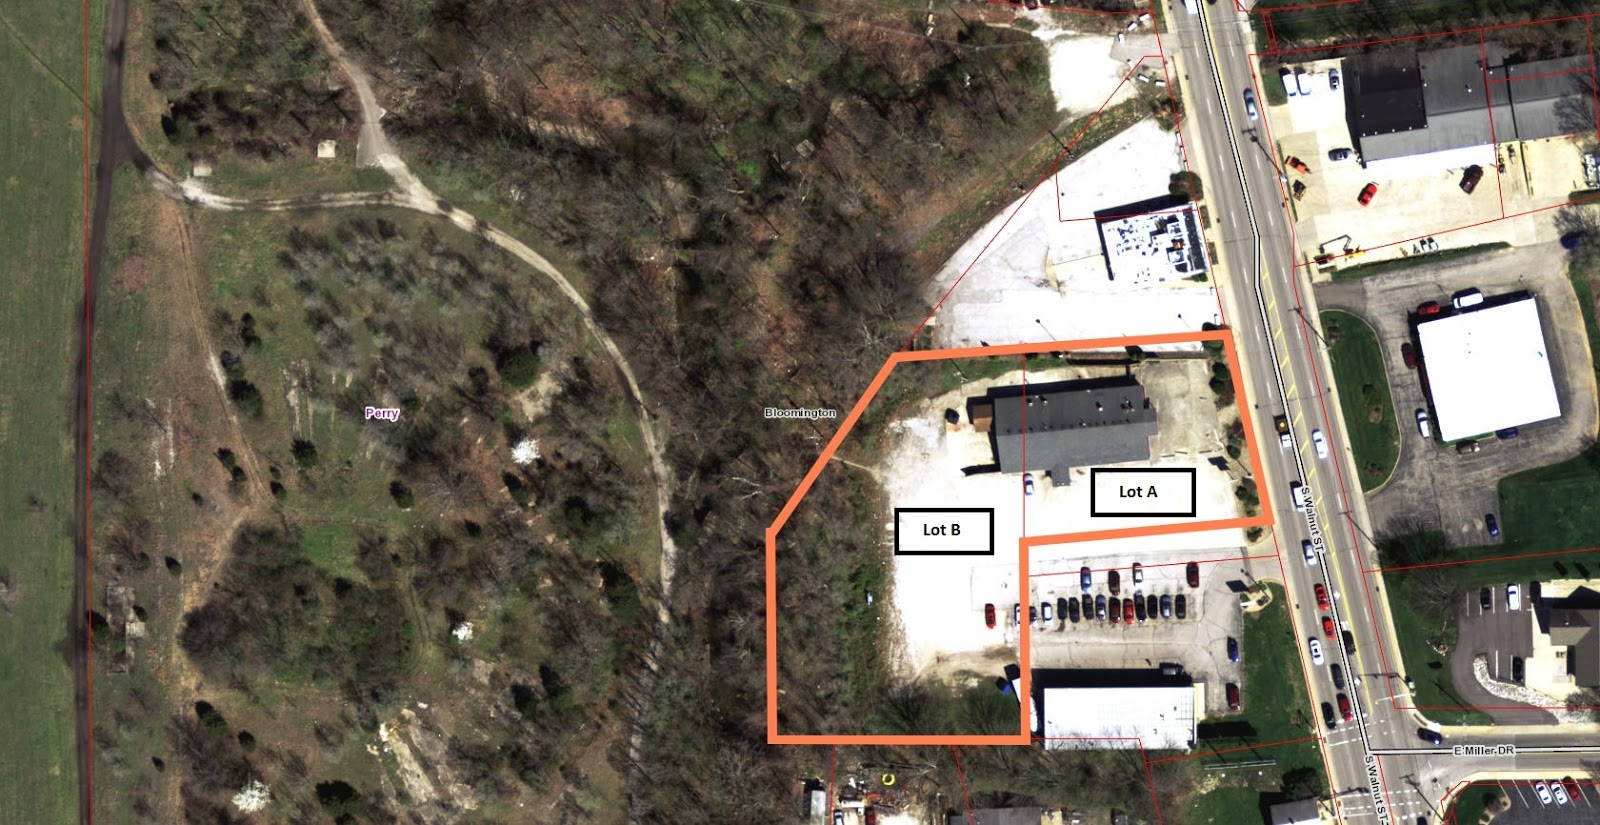 The parcel for development at 1730 South Walnut Street is outlined in orange.